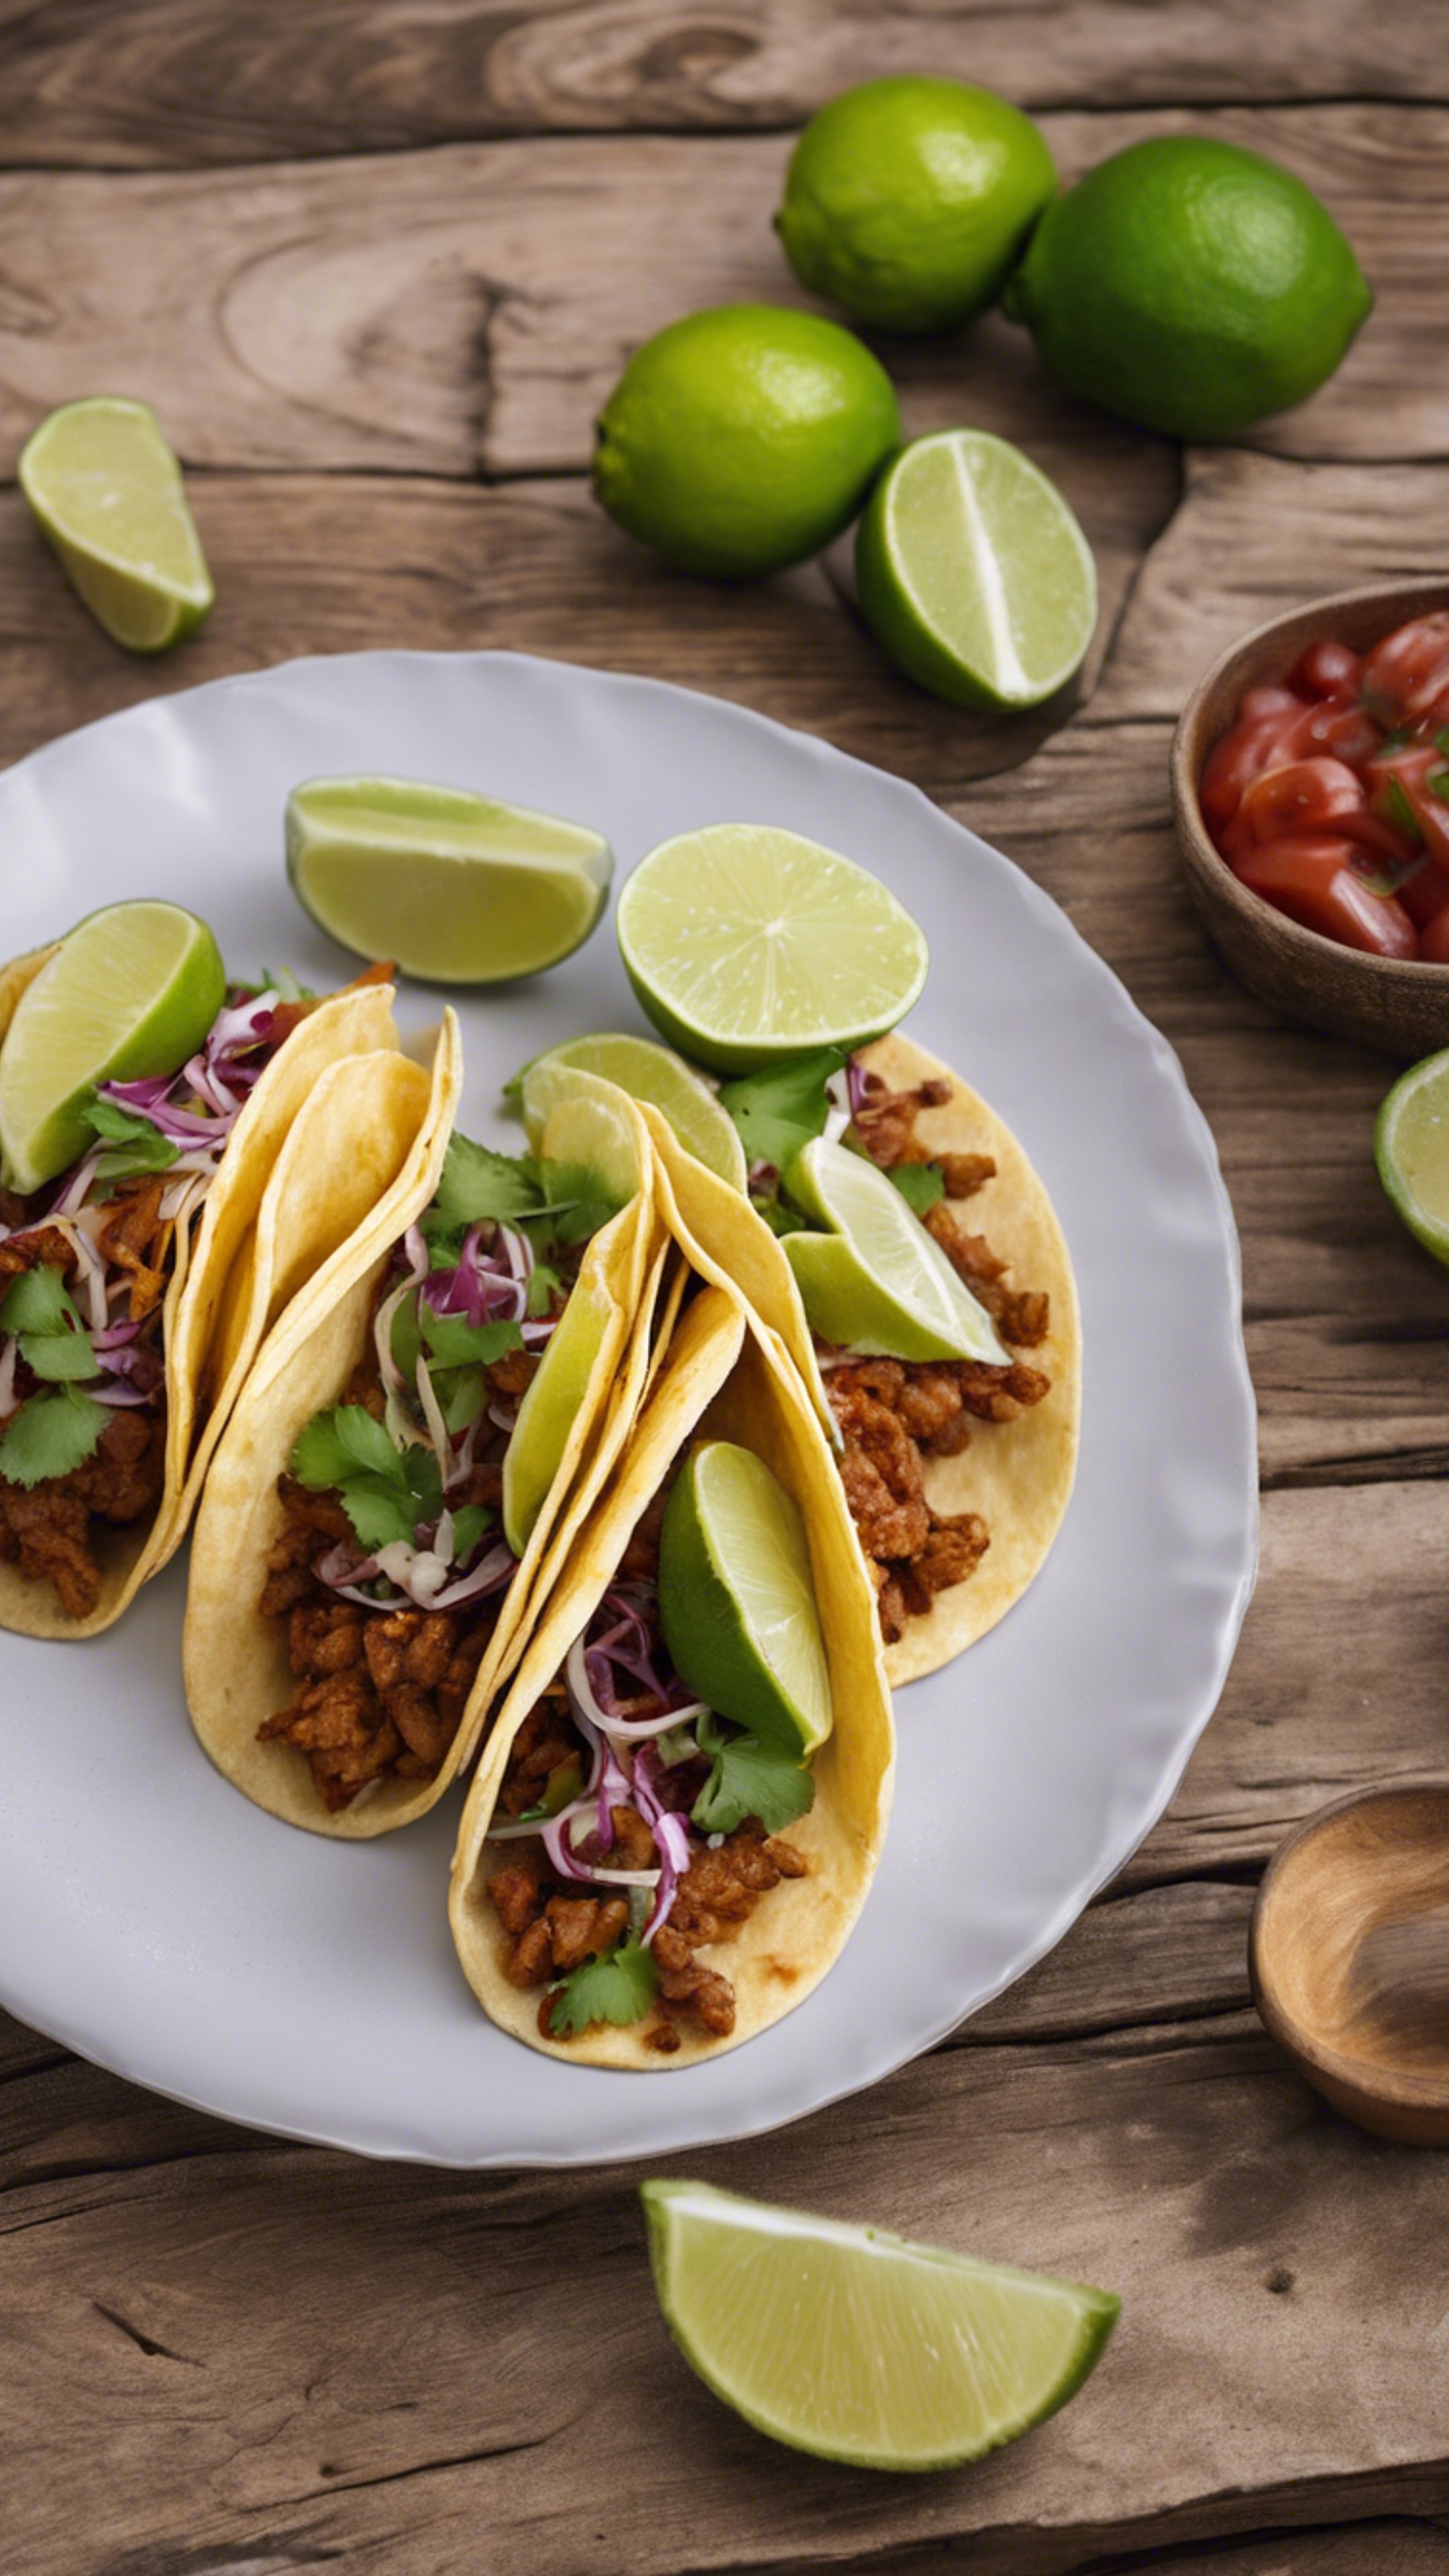 A plate of tacos garnished with fresh lime wedges on a rustic wooden table. Tapeet[5f6c6b777f9c4d0caf3c]